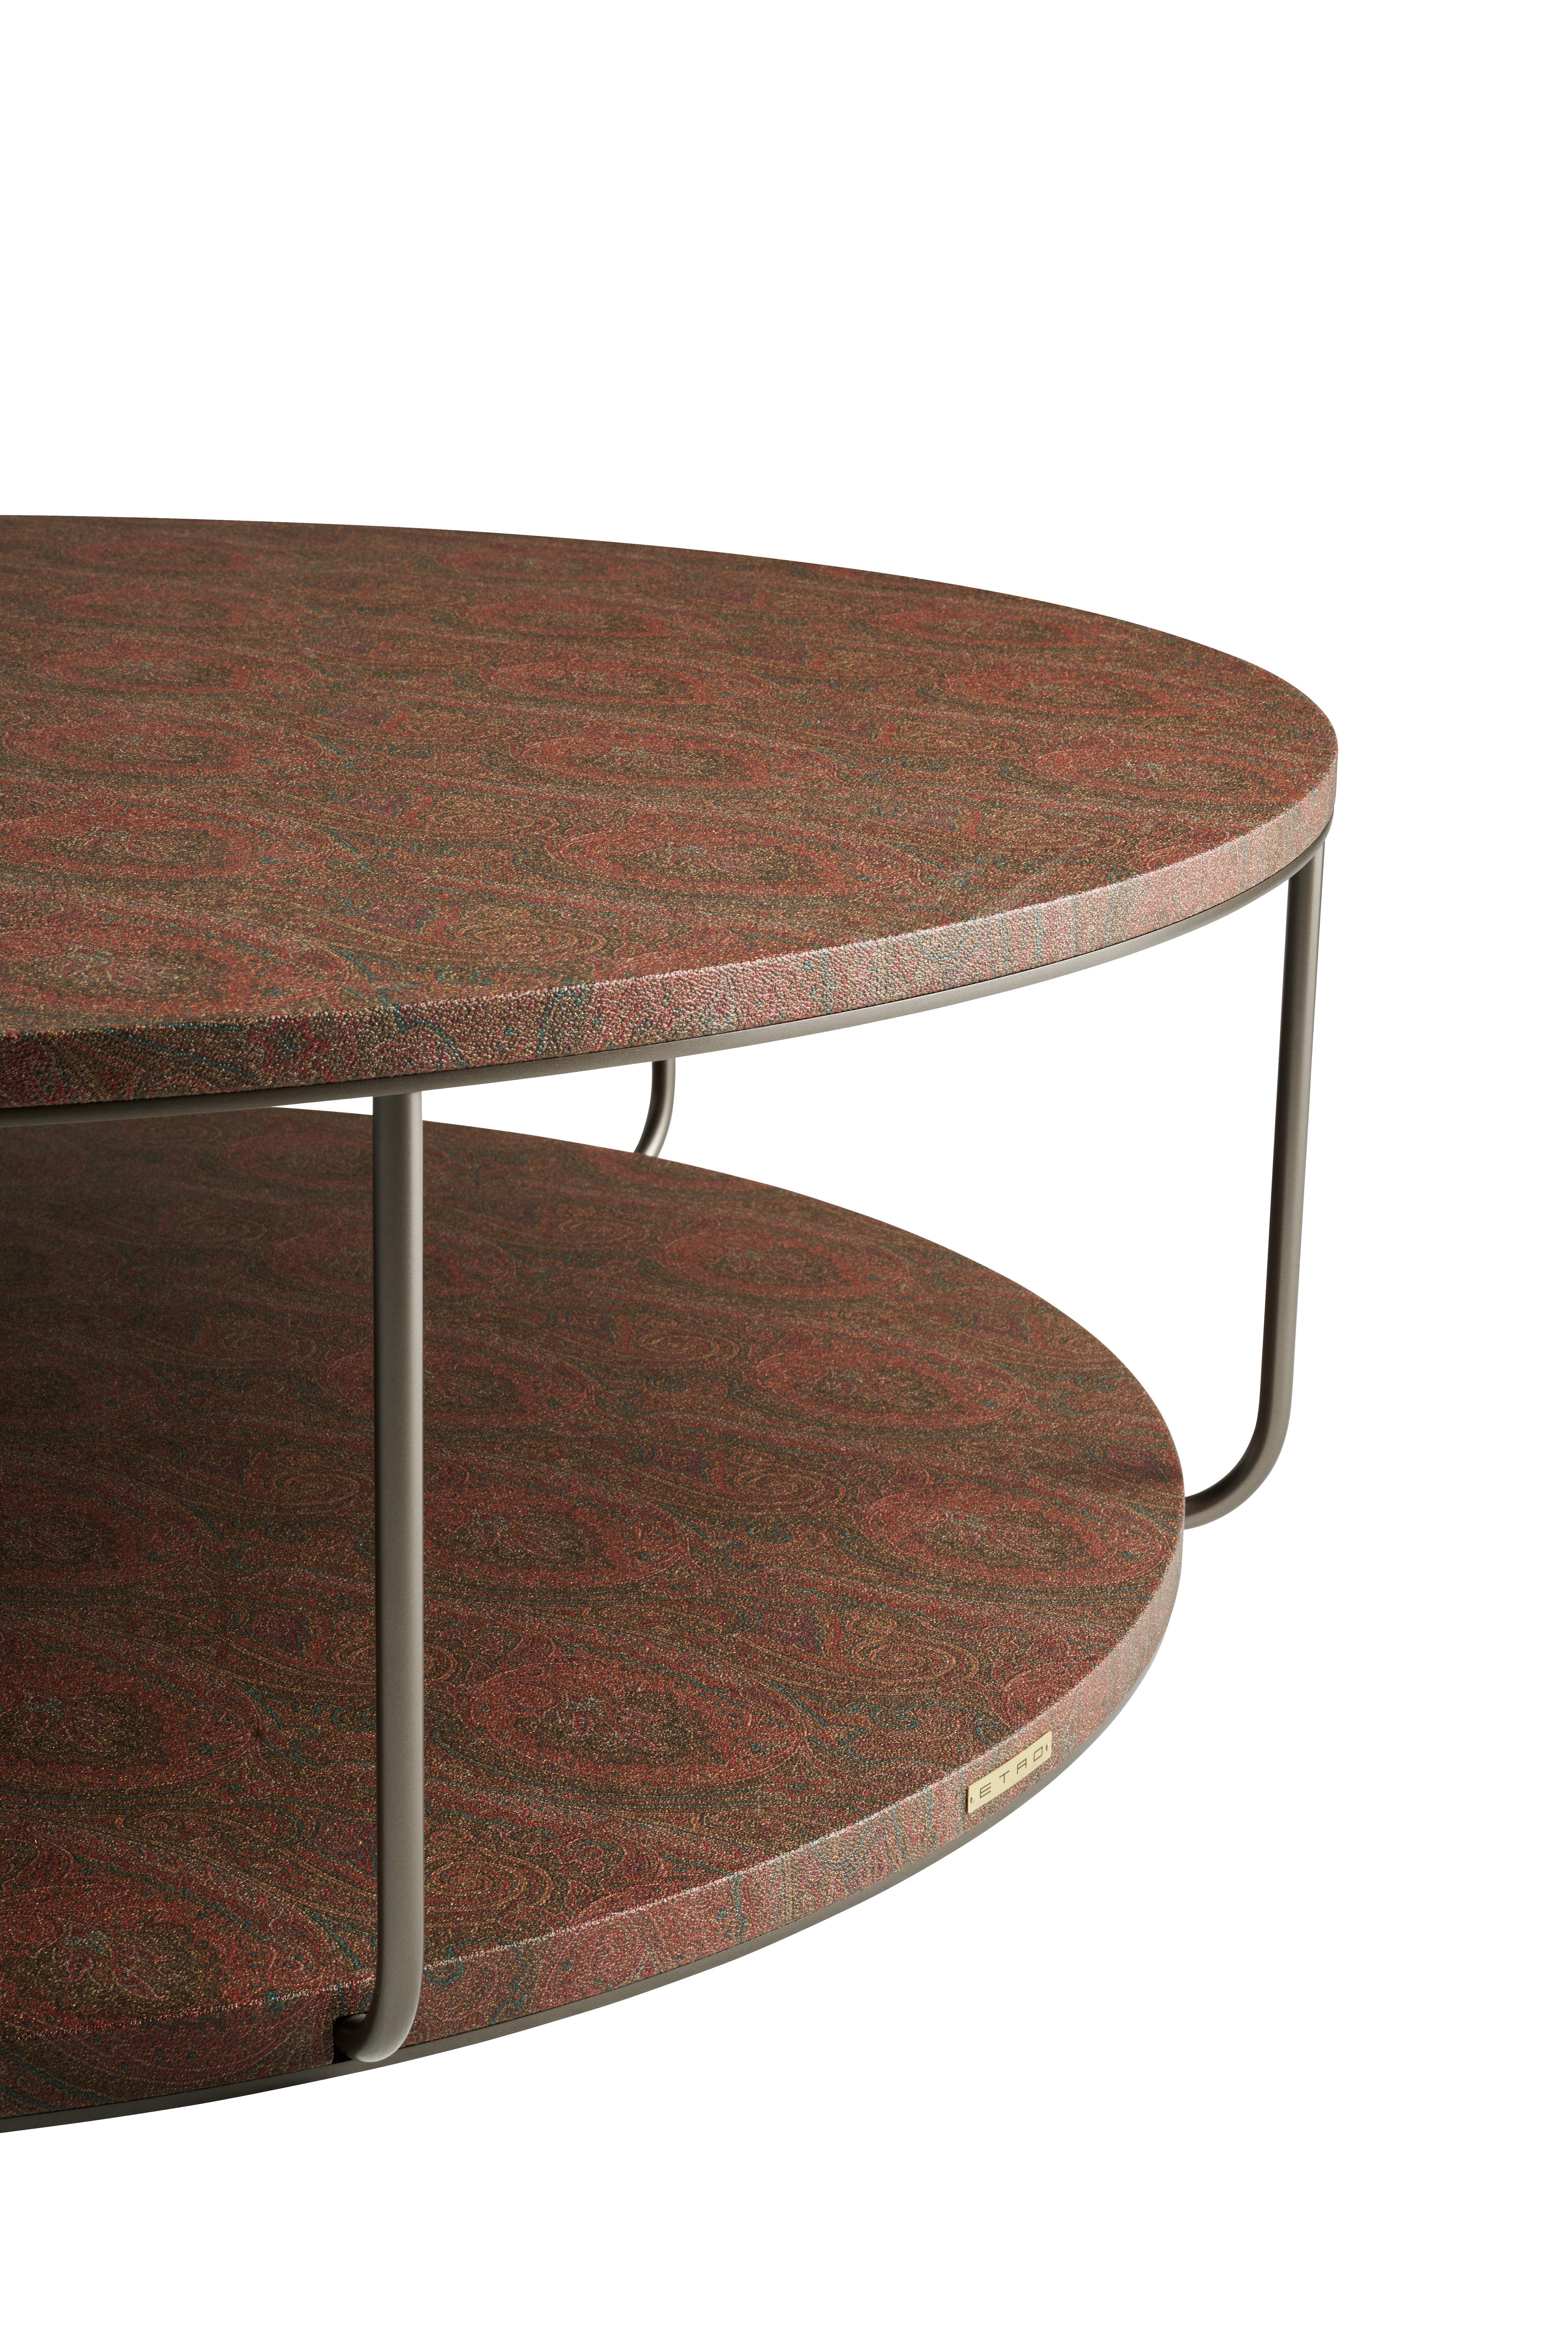 Modern 21st Century Double Central Table in Coated Fabric by Etro Home Interiors For Sale